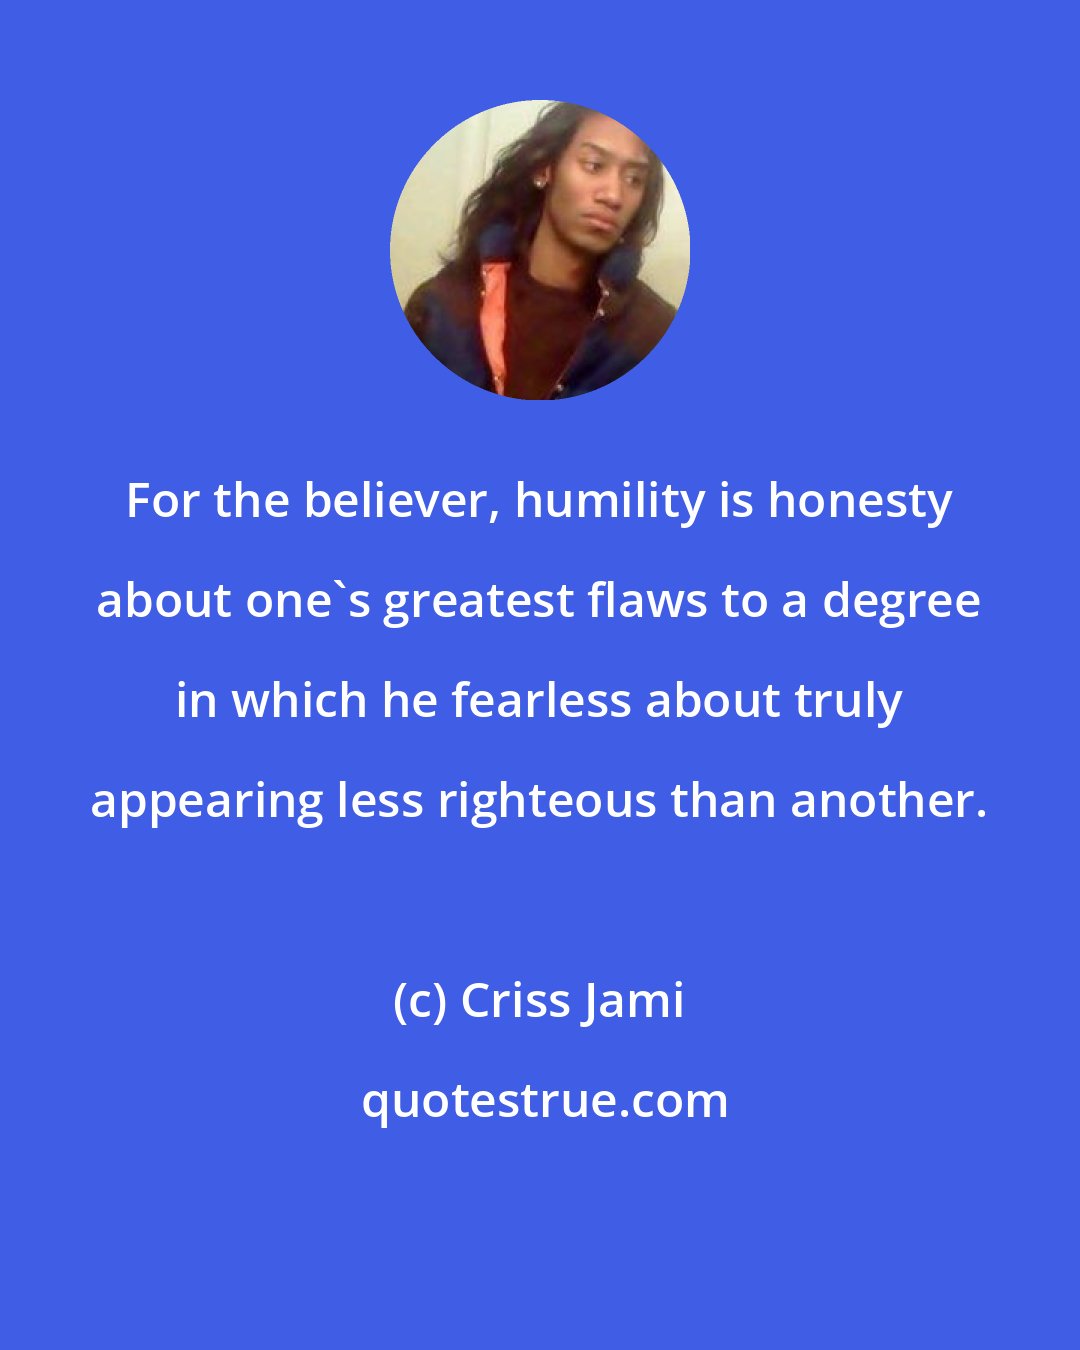 Criss Jami: For the believer, humility is honesty about one's greatest flaws to a degree in which he fearless about truly appearing less righteous than another.